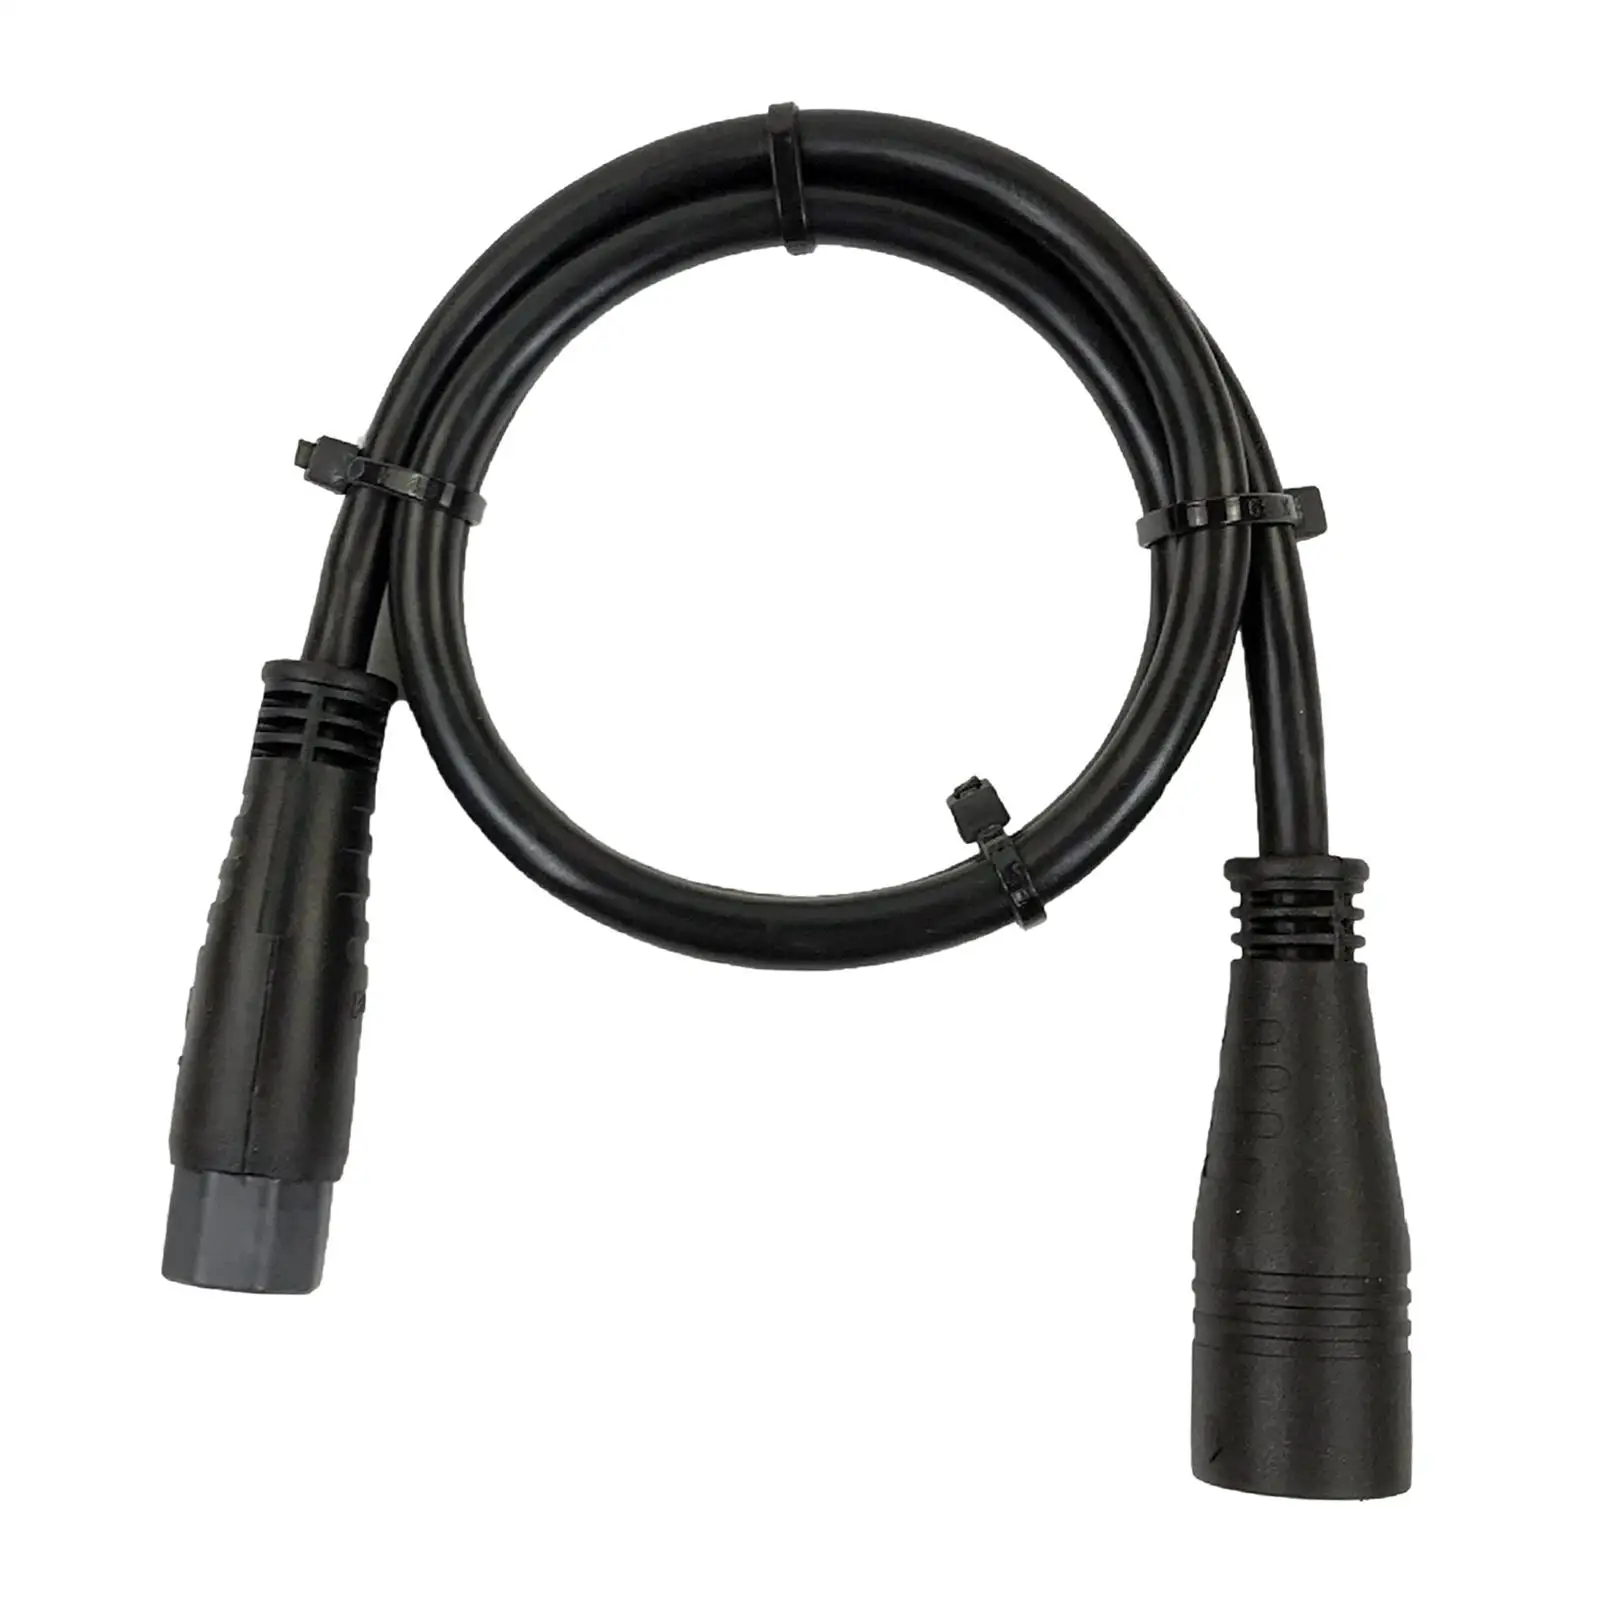 3 Pin Motor Extension Cable Cord for E Bike Electric Bicycle Accessories